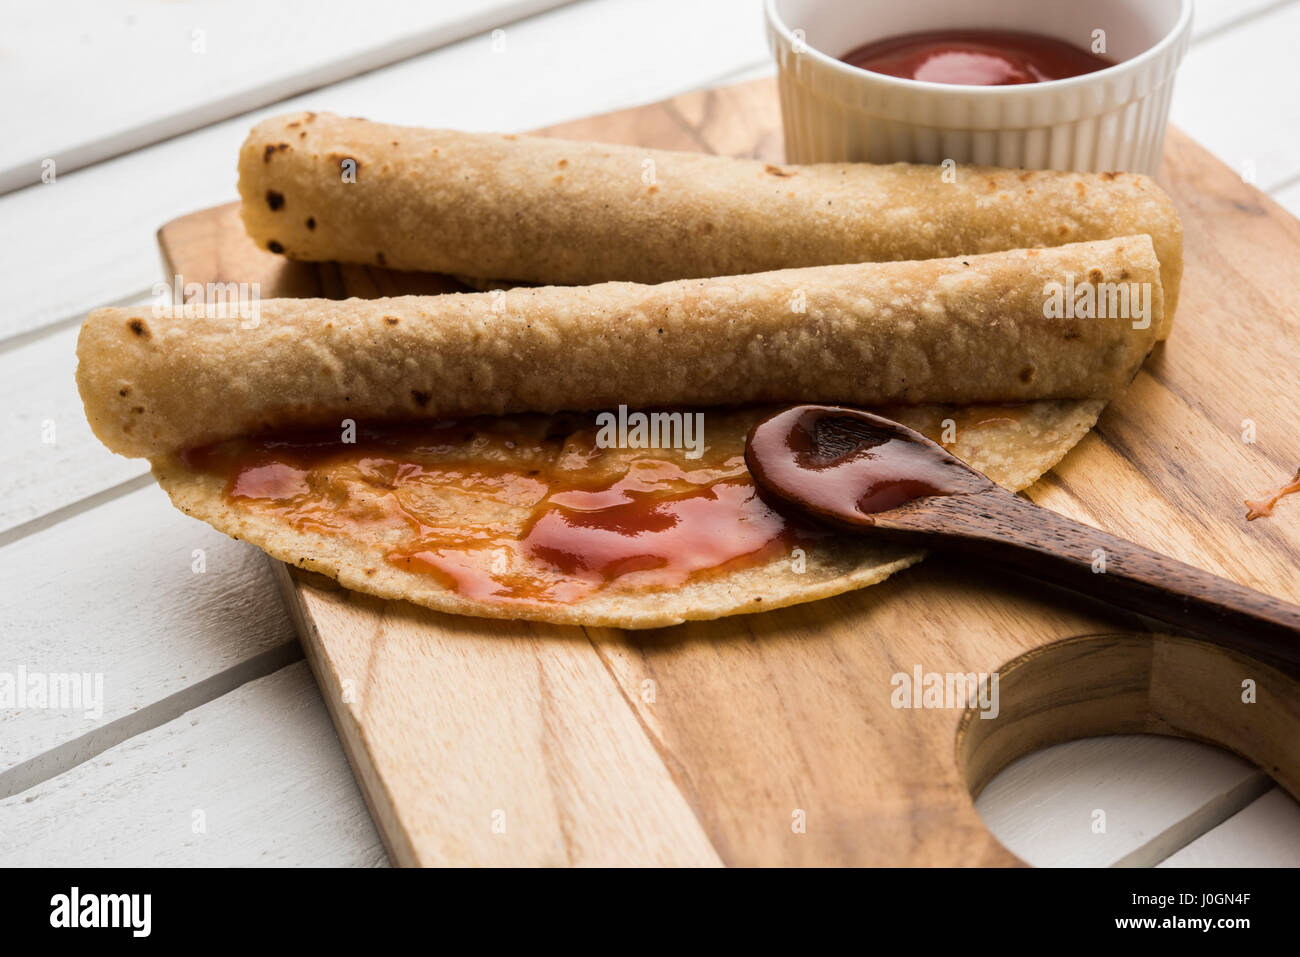 indian bread or chapati or paratha rolled with fruit jam, typical ...